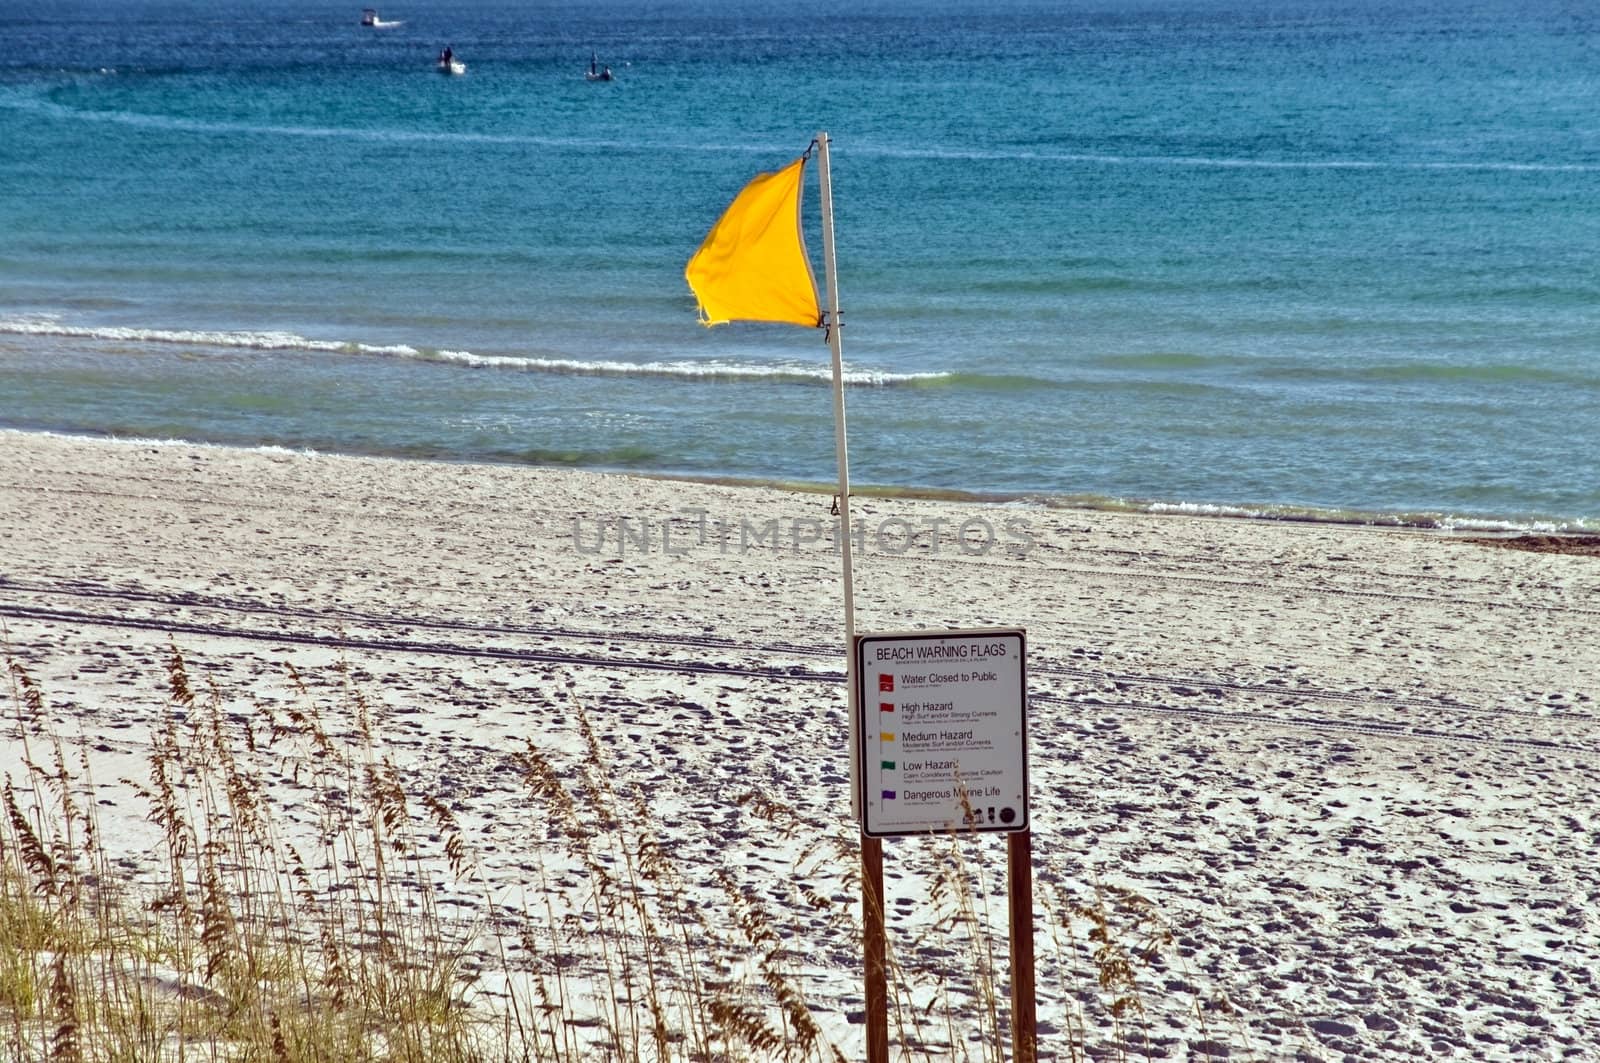 A yellow flag, with sign, waving in the wind on a beach.